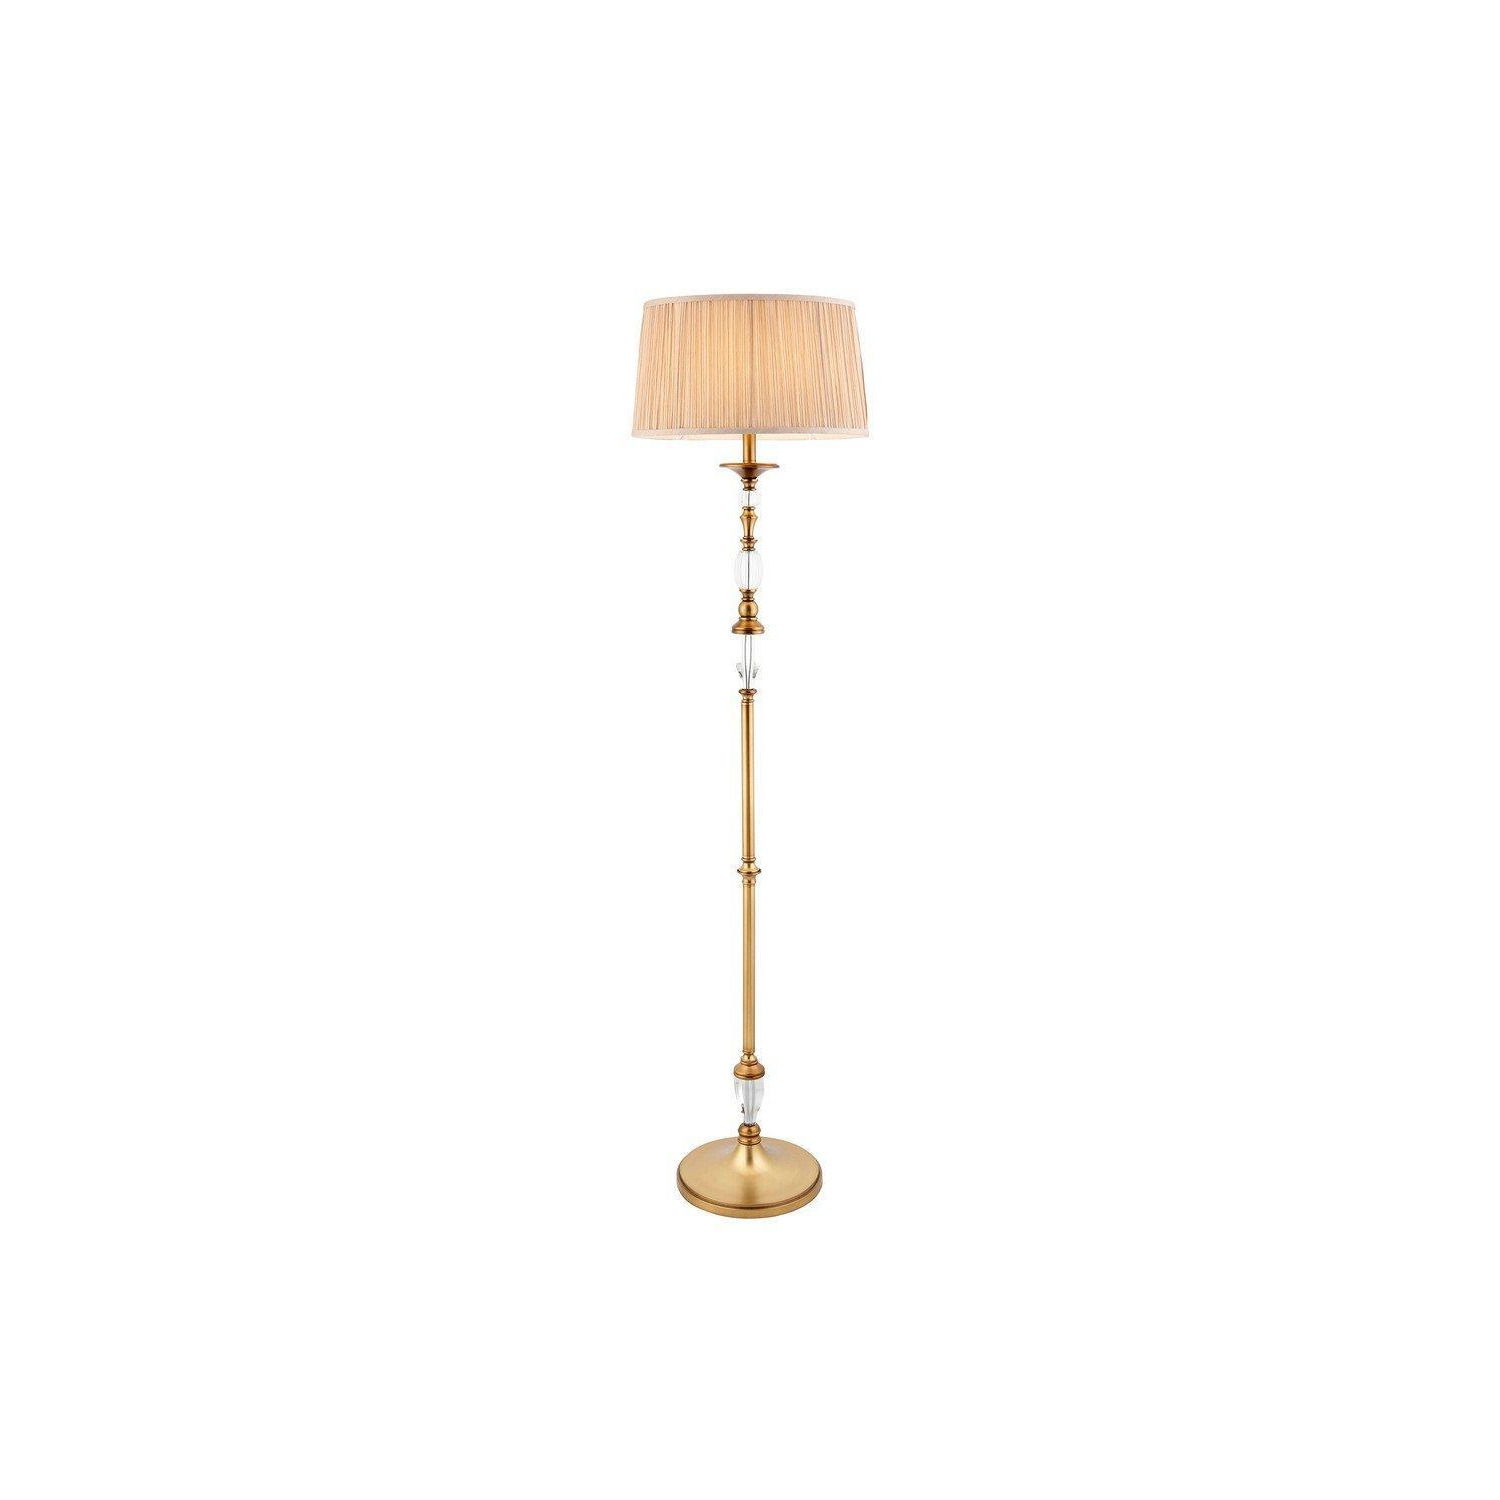 Polina 1 Light Floor Lamp Antique Brass with Beige Shade E27 - image 1